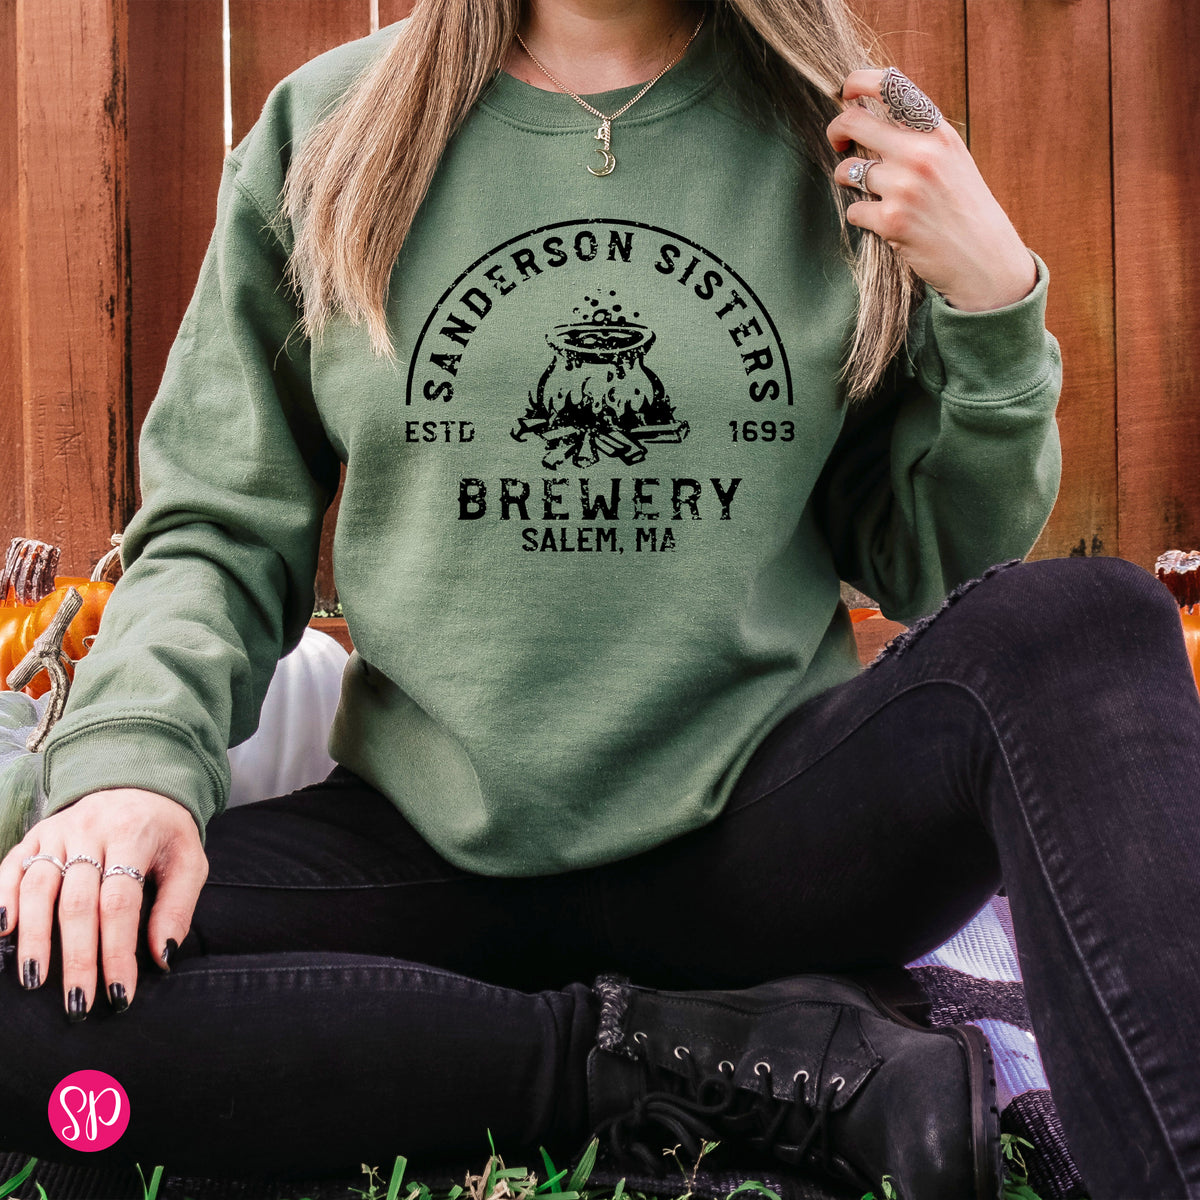 Sanderson Sisters Brewery Witches Brew Beer Salem Ma 1693 Funny Halloween Spooky Season Fall Sweatshirt Pullover Crewneck